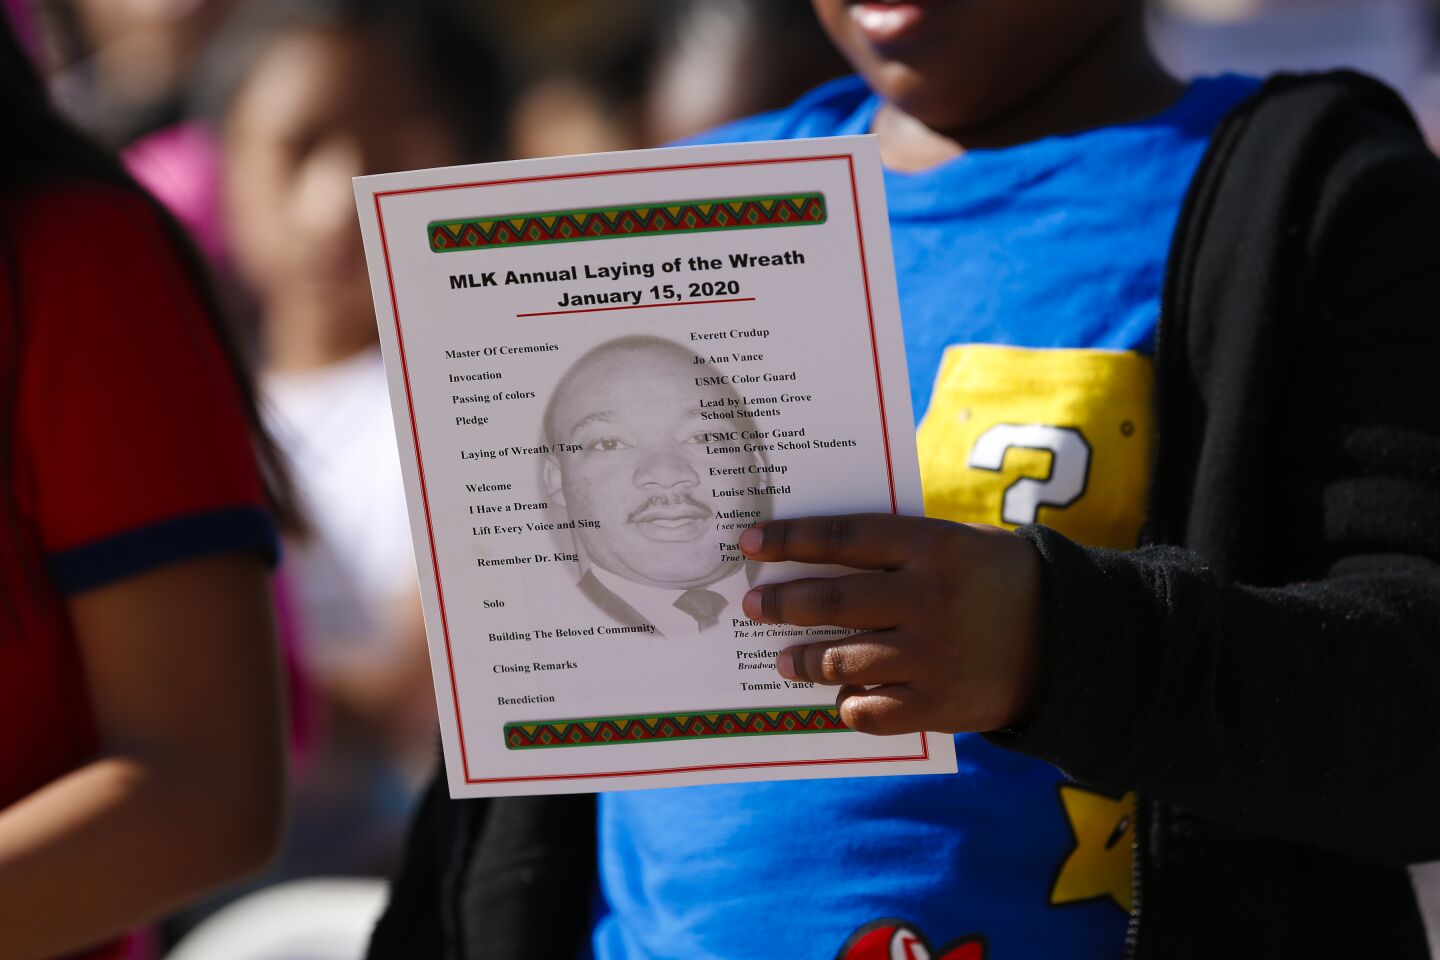 As part of the MLK Annual Laying of the Wreath on January 15, 2020, local elementary school children were invited to take part in the ceremony. Construction for the Martin Luther King, Jr. Way promenade began back on September 2018 and completed in February 2019.,